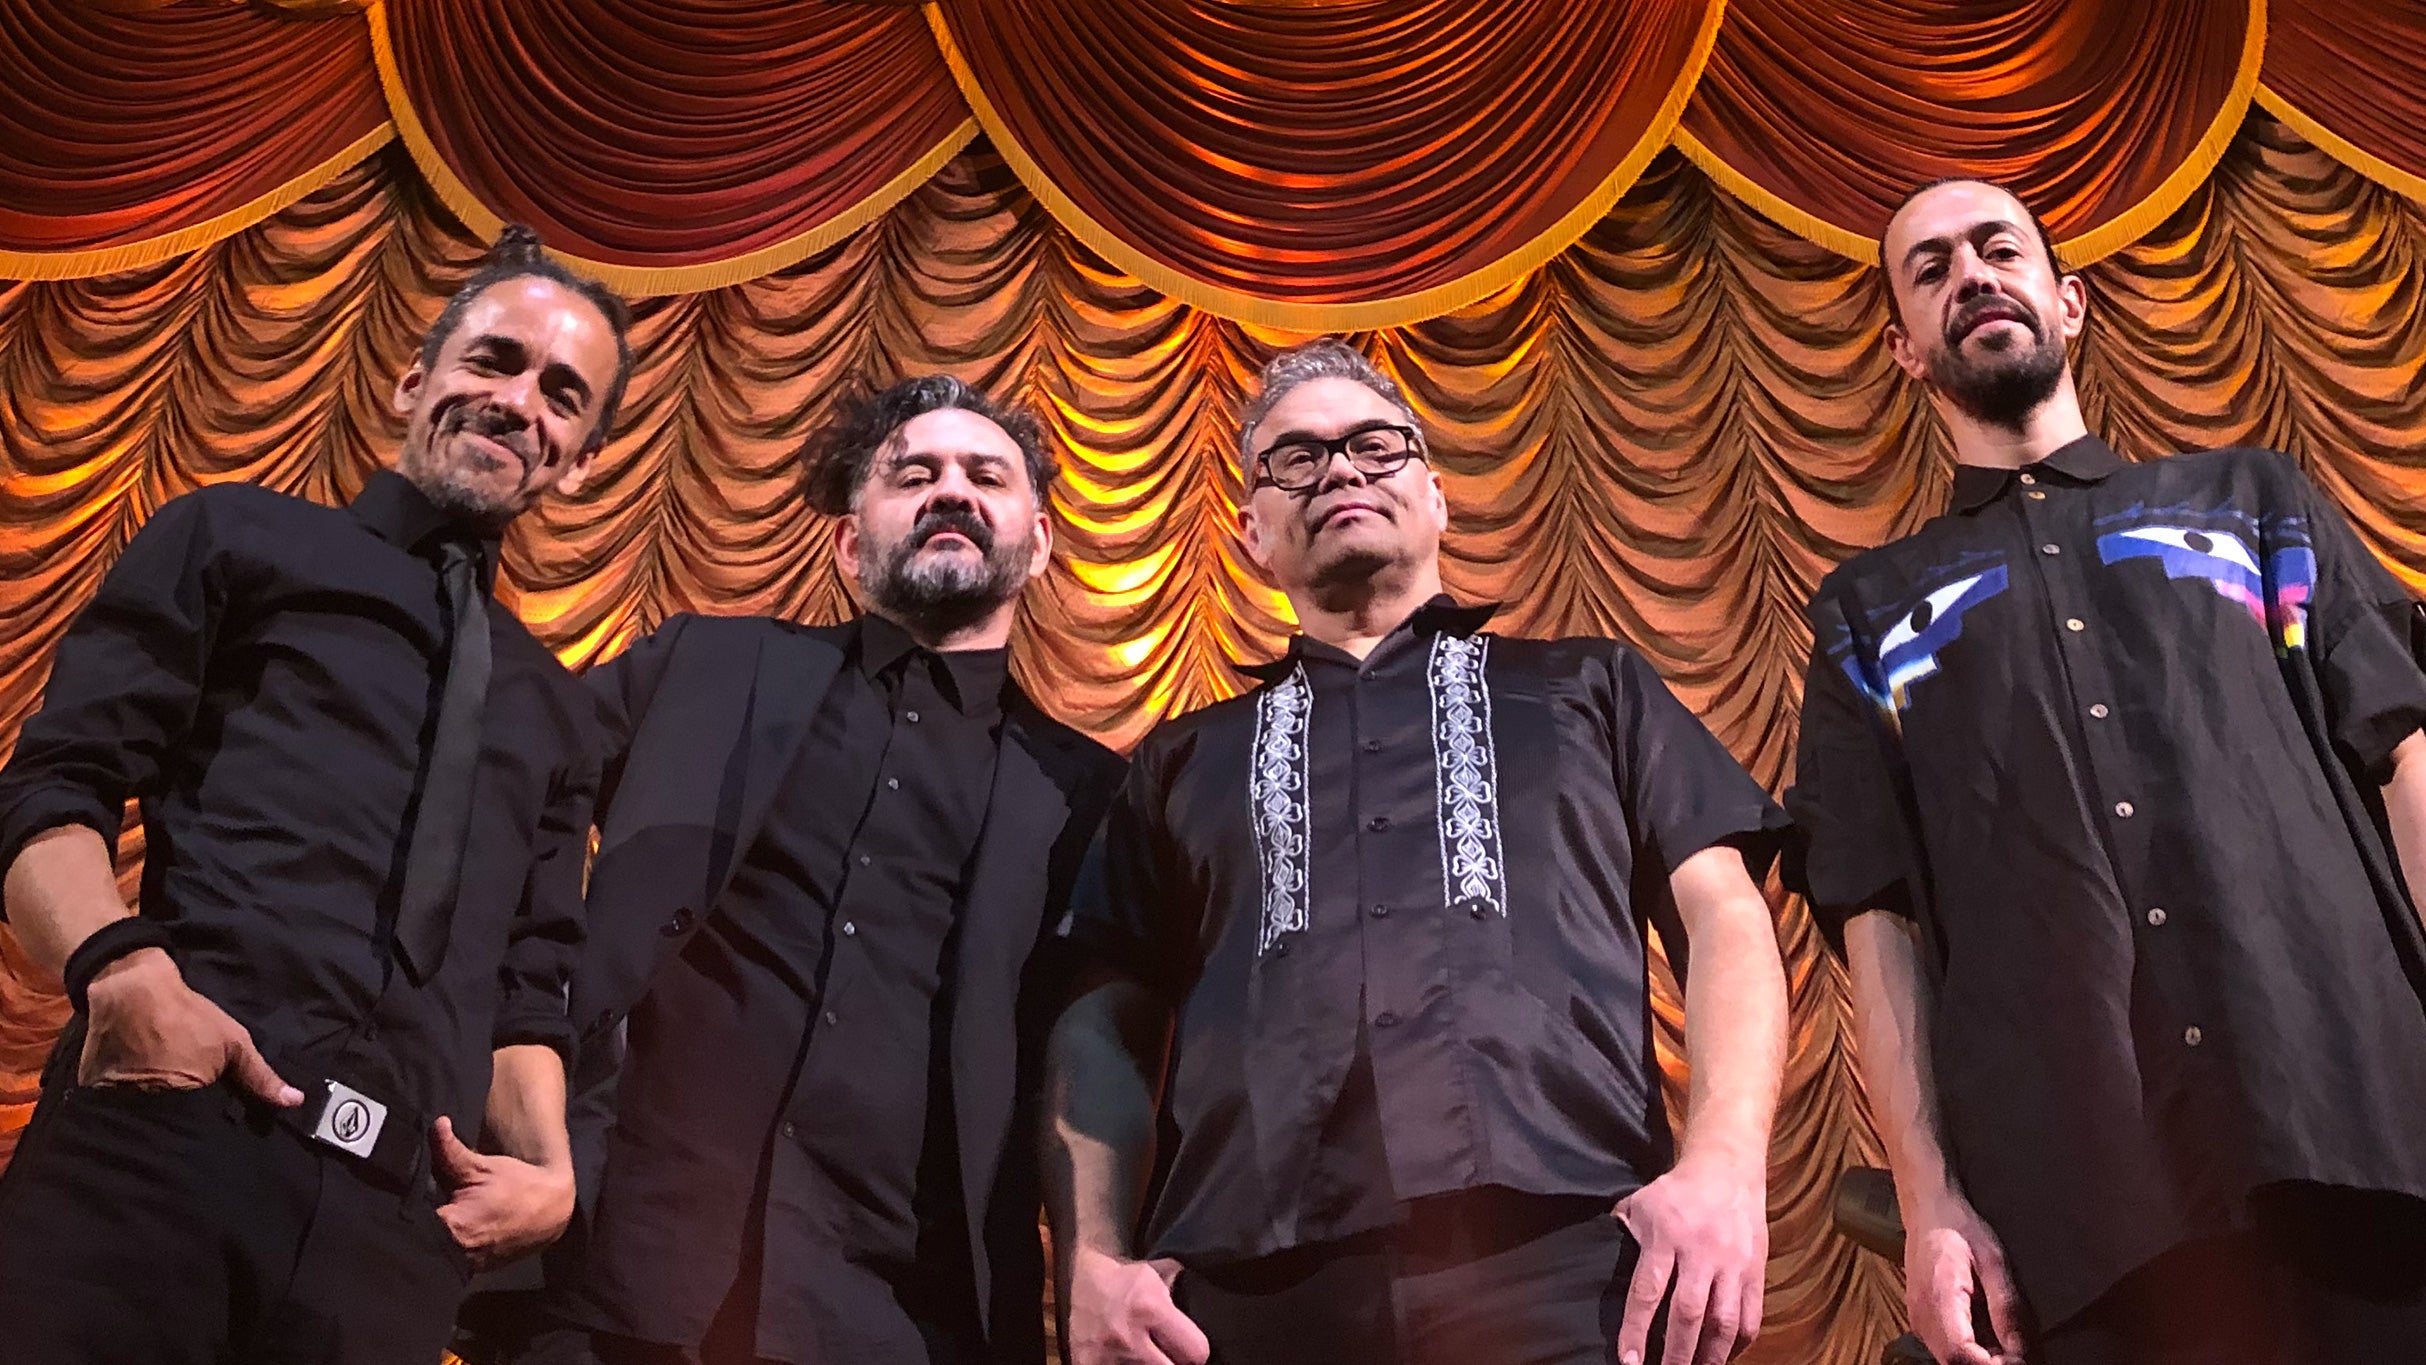 Café Tacvba - US Tour 2023 in Wheatland promo photo for VIP Package presale offer code